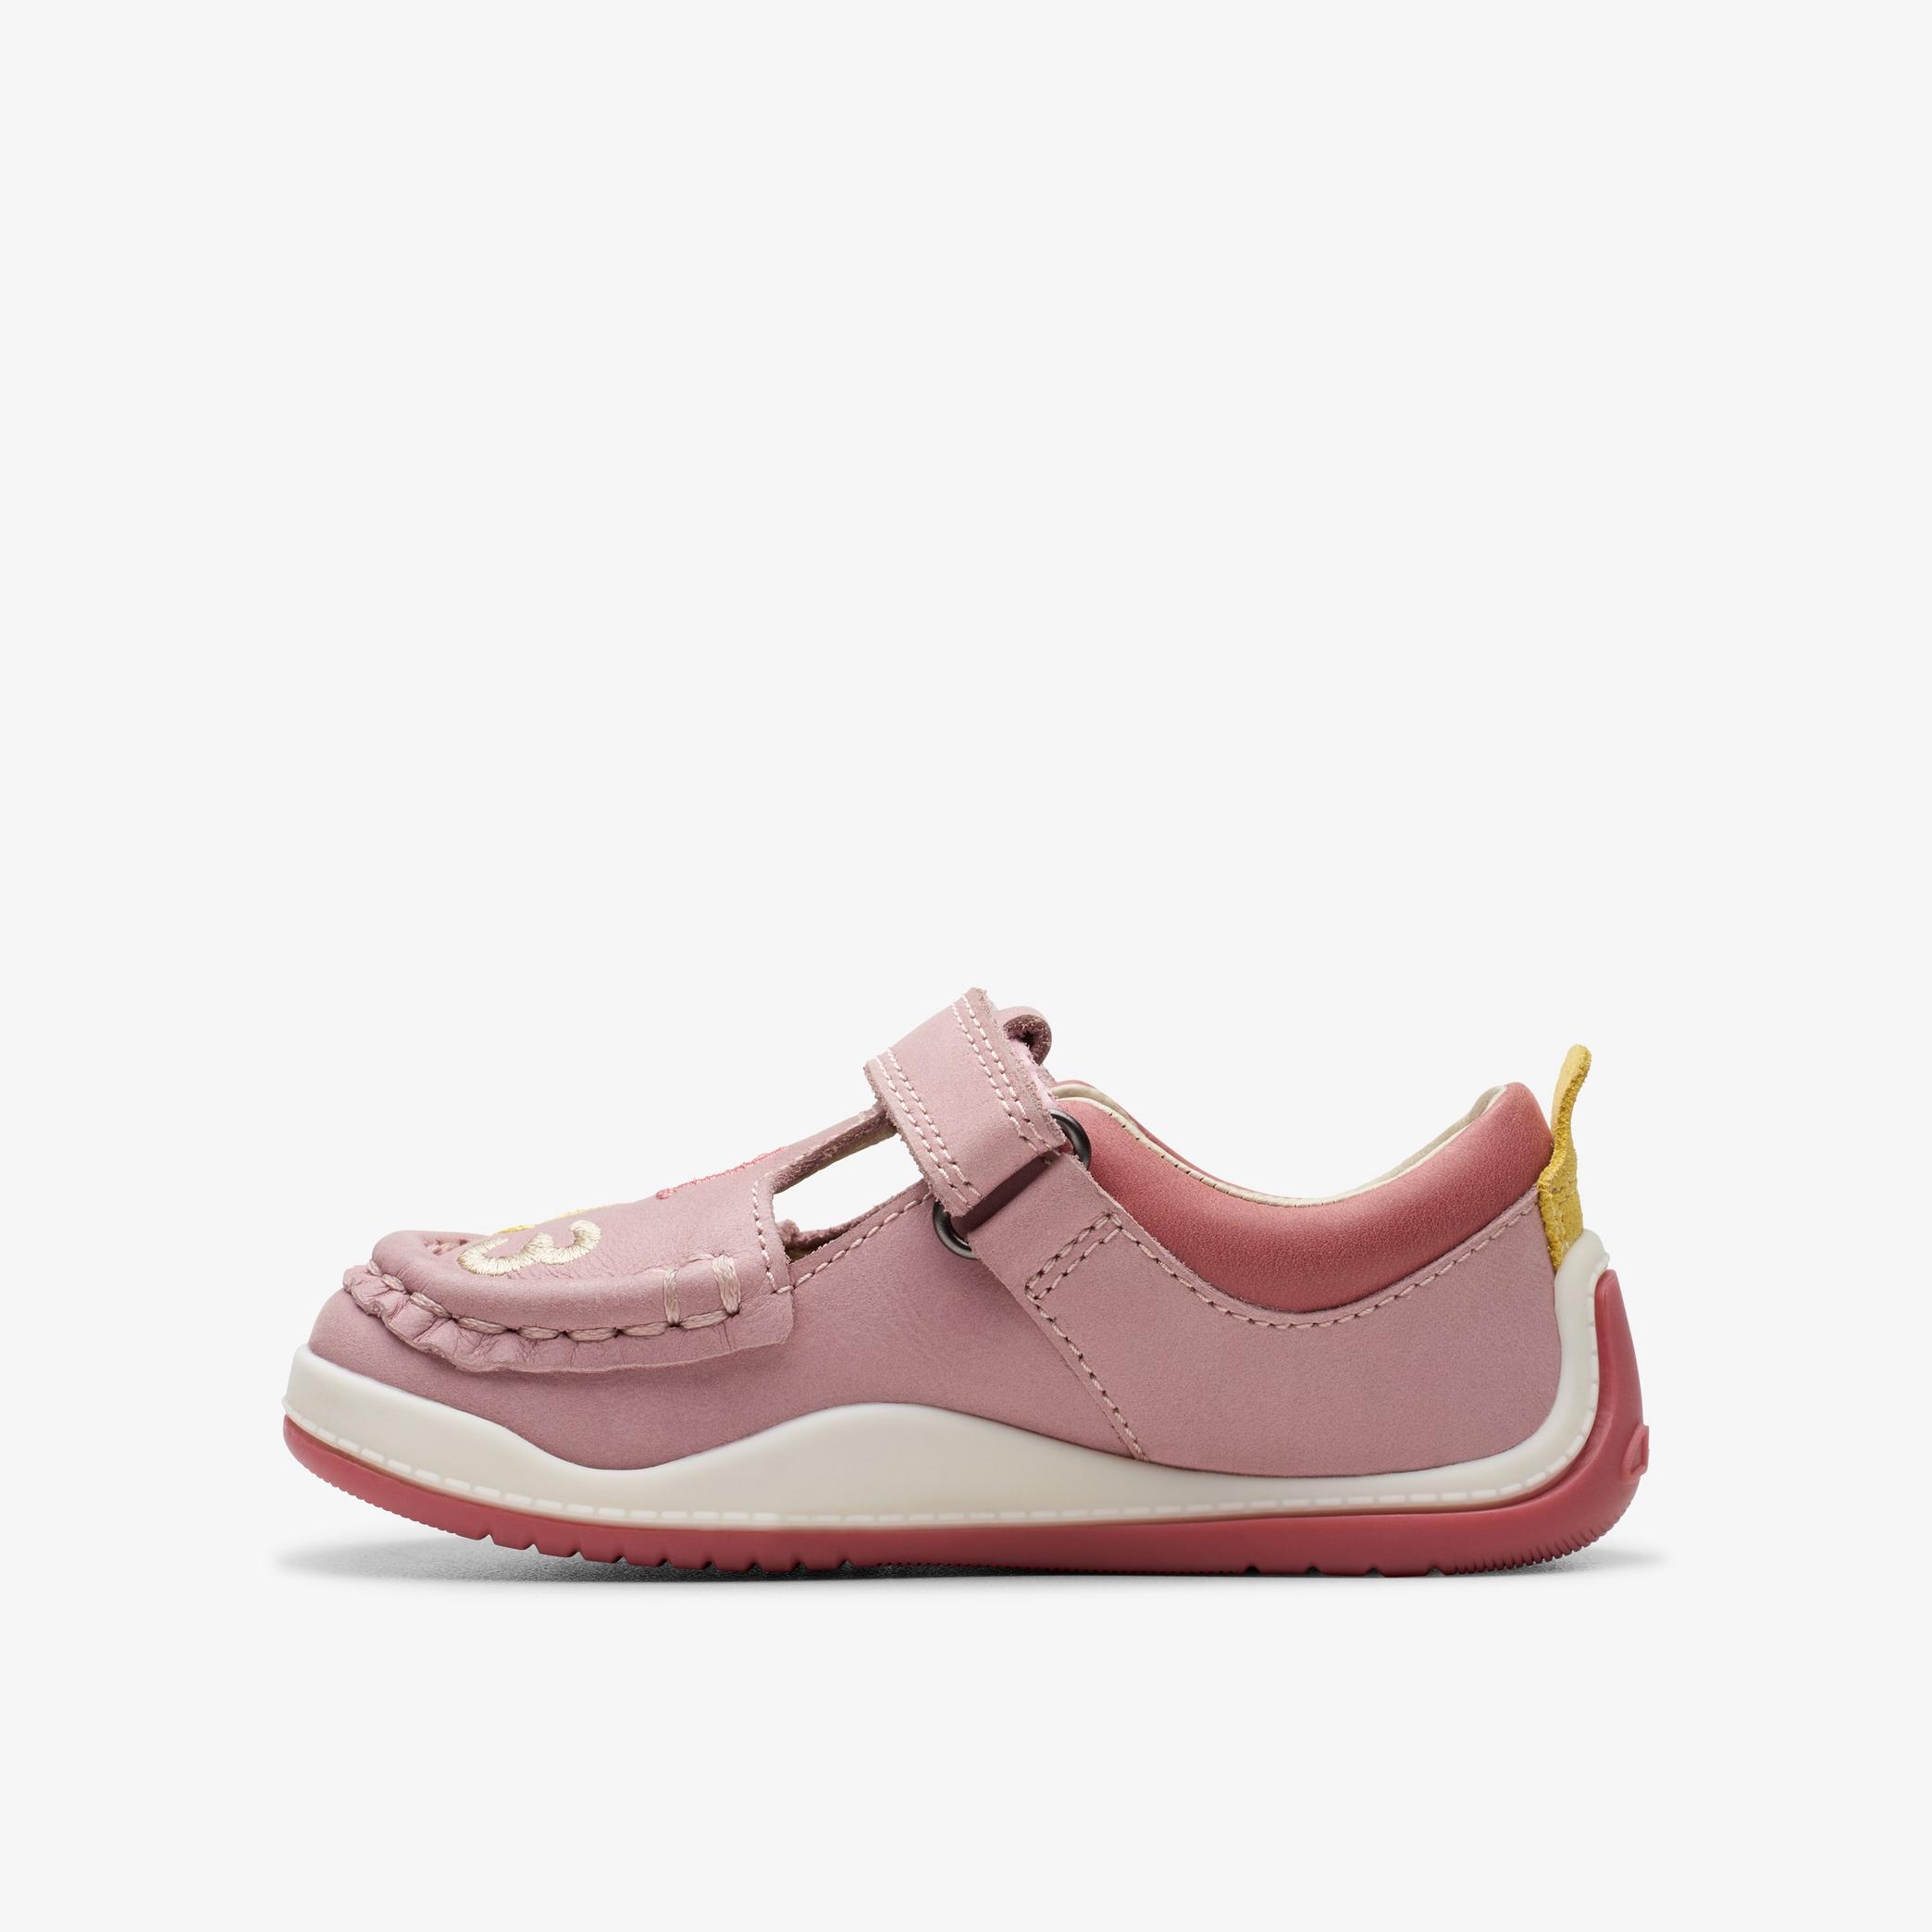 Noodle Shine Toddler Dusty Pink Leather T Bar Shoes, view 5 of 10